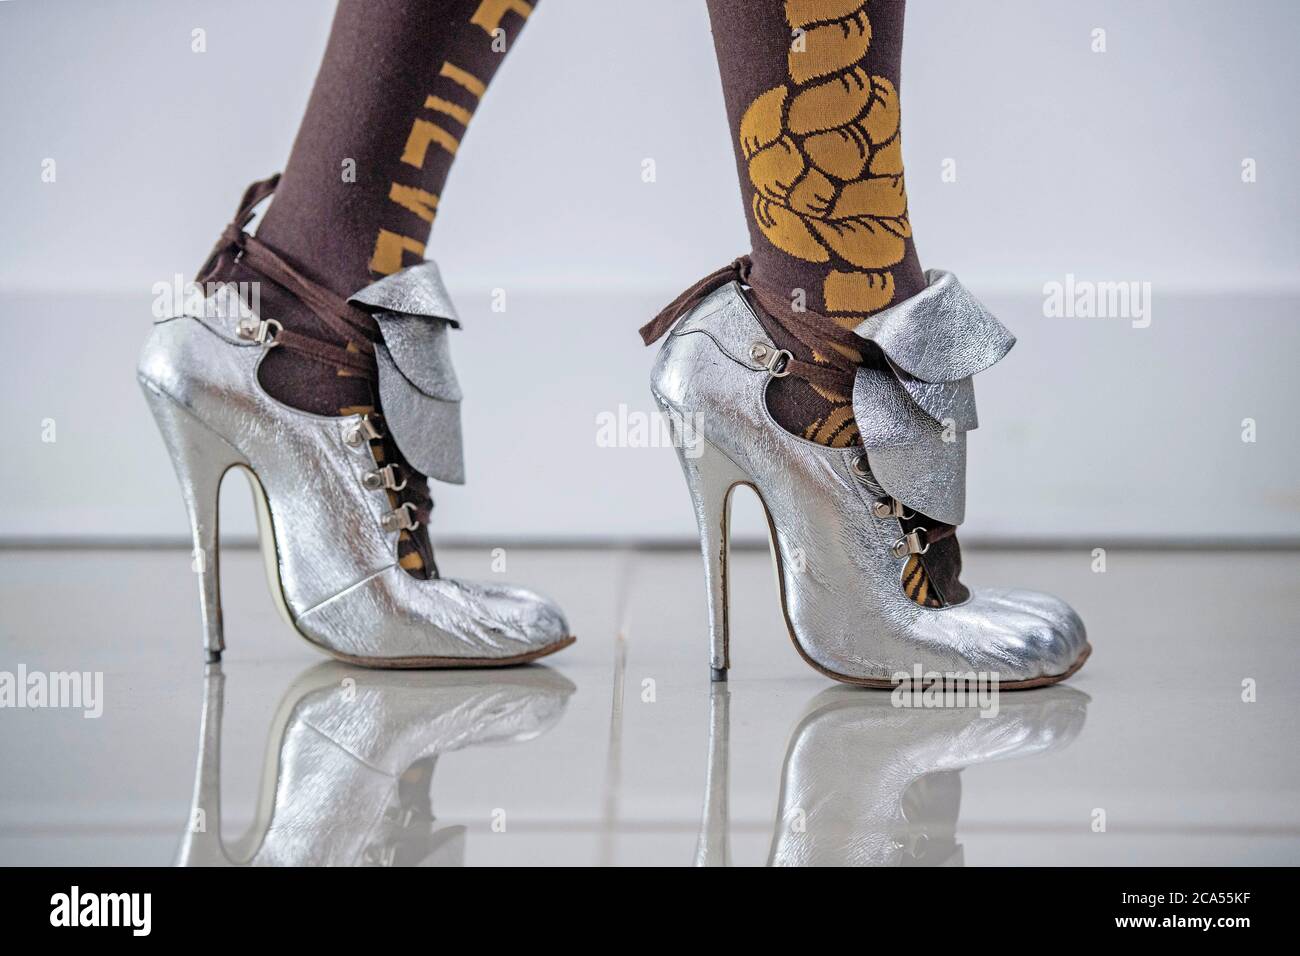 Heeled shoes and tights by UK fashion designer Vivienne Westwood. Stock Photo